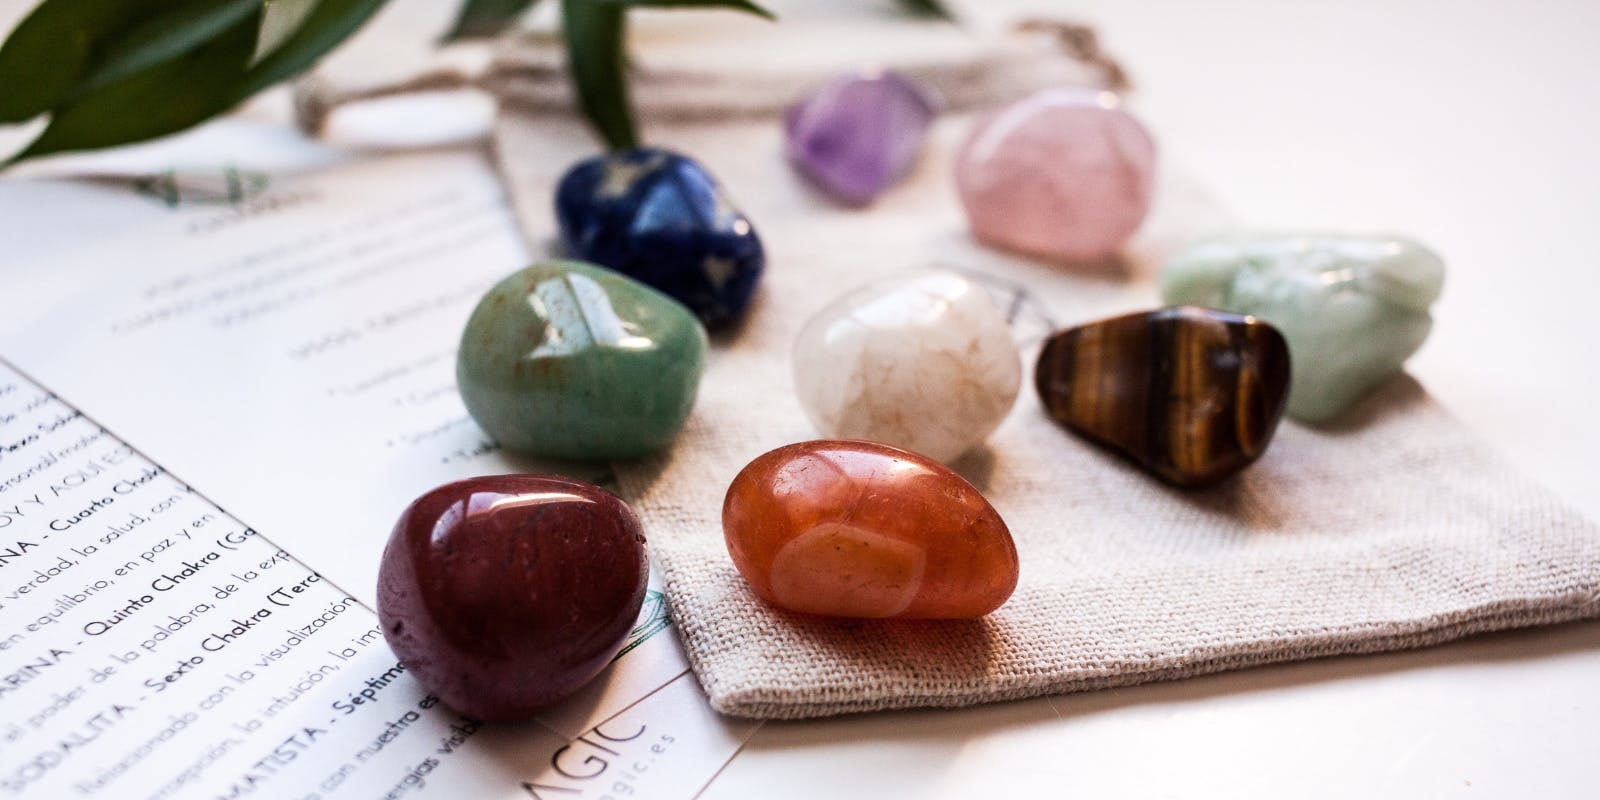 8 of the best books about crystals - Penguin Books Australia